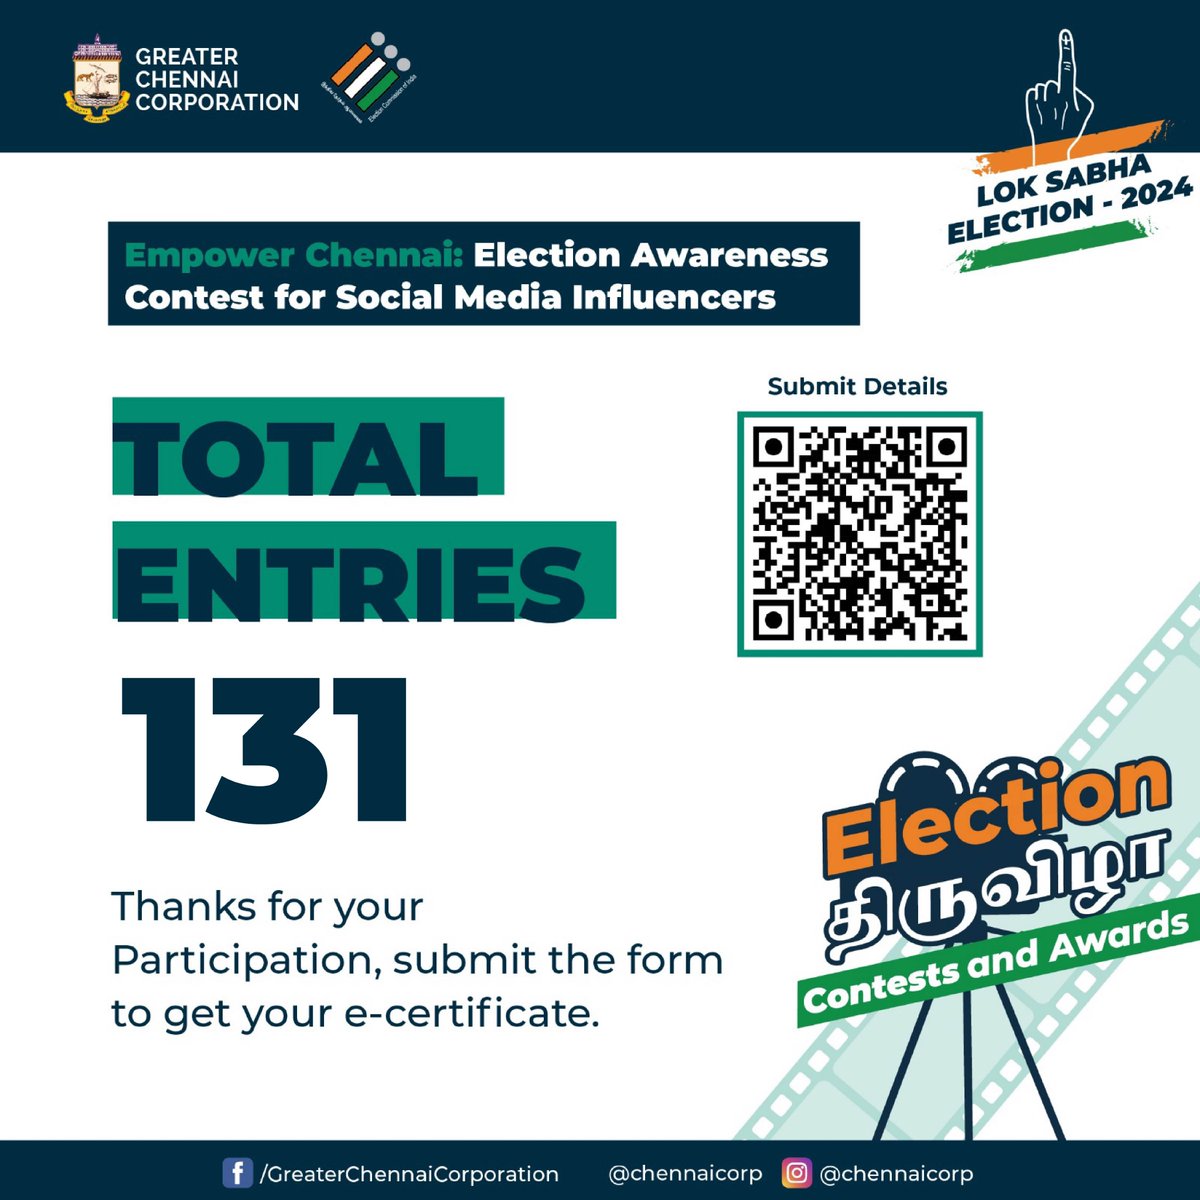 Hey #Chennaiites,

GCC expresses appreciation to all influencers for motivating their followers across social media platforms to vote. Your certificates will be issued shortly. 

@RAKRI1 
#ChennaiCorporation
#Election2024
#LokSabhaElections2024